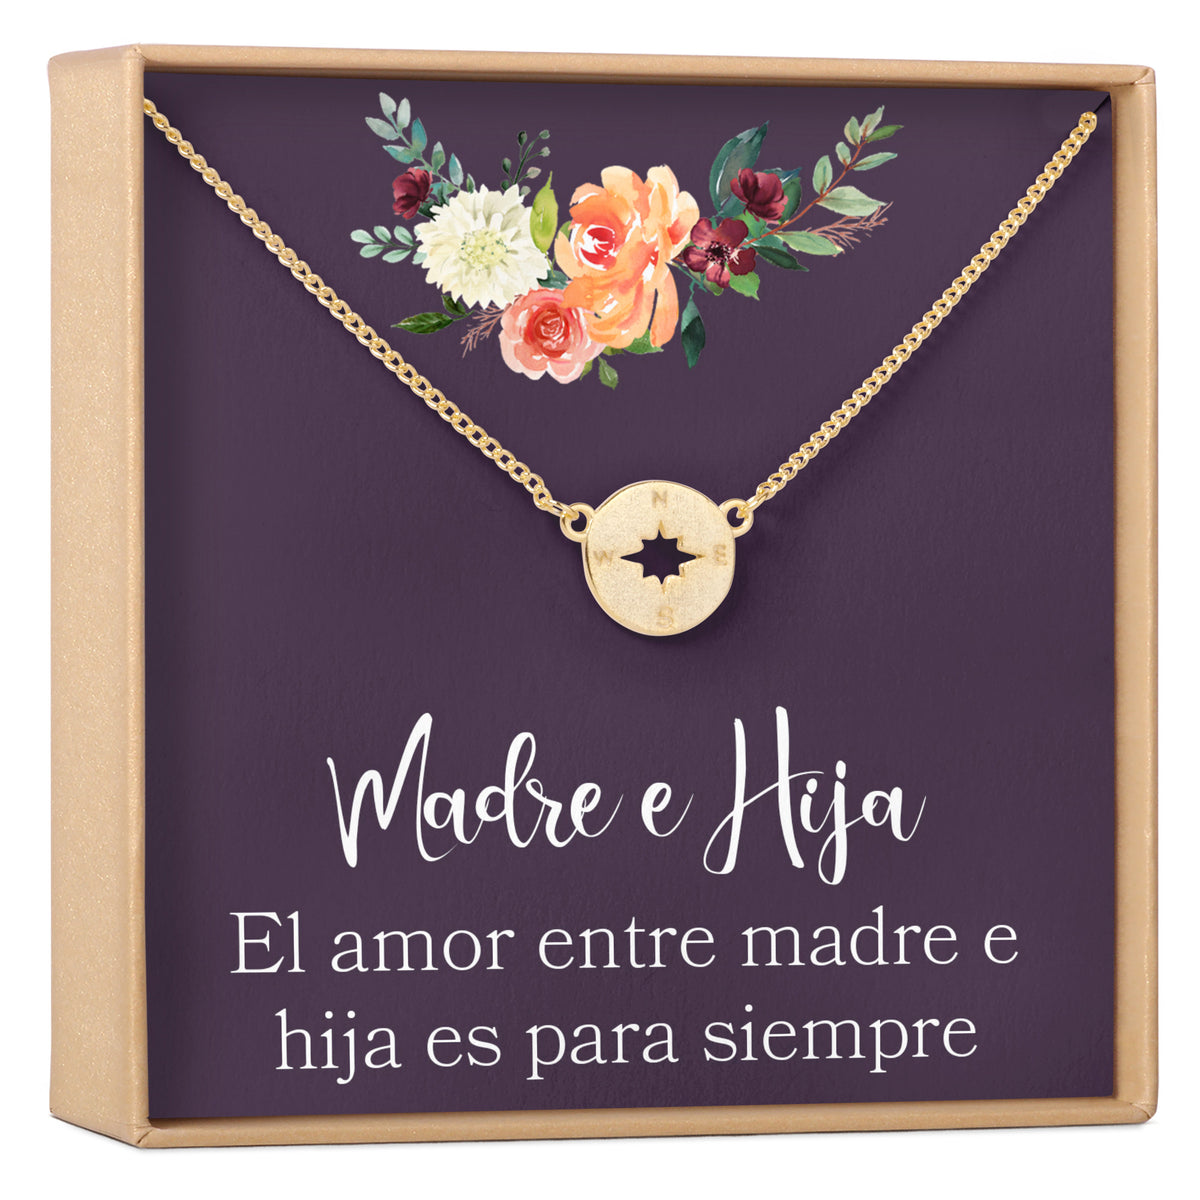 Madre e Hija Necklace, Multiple Styles